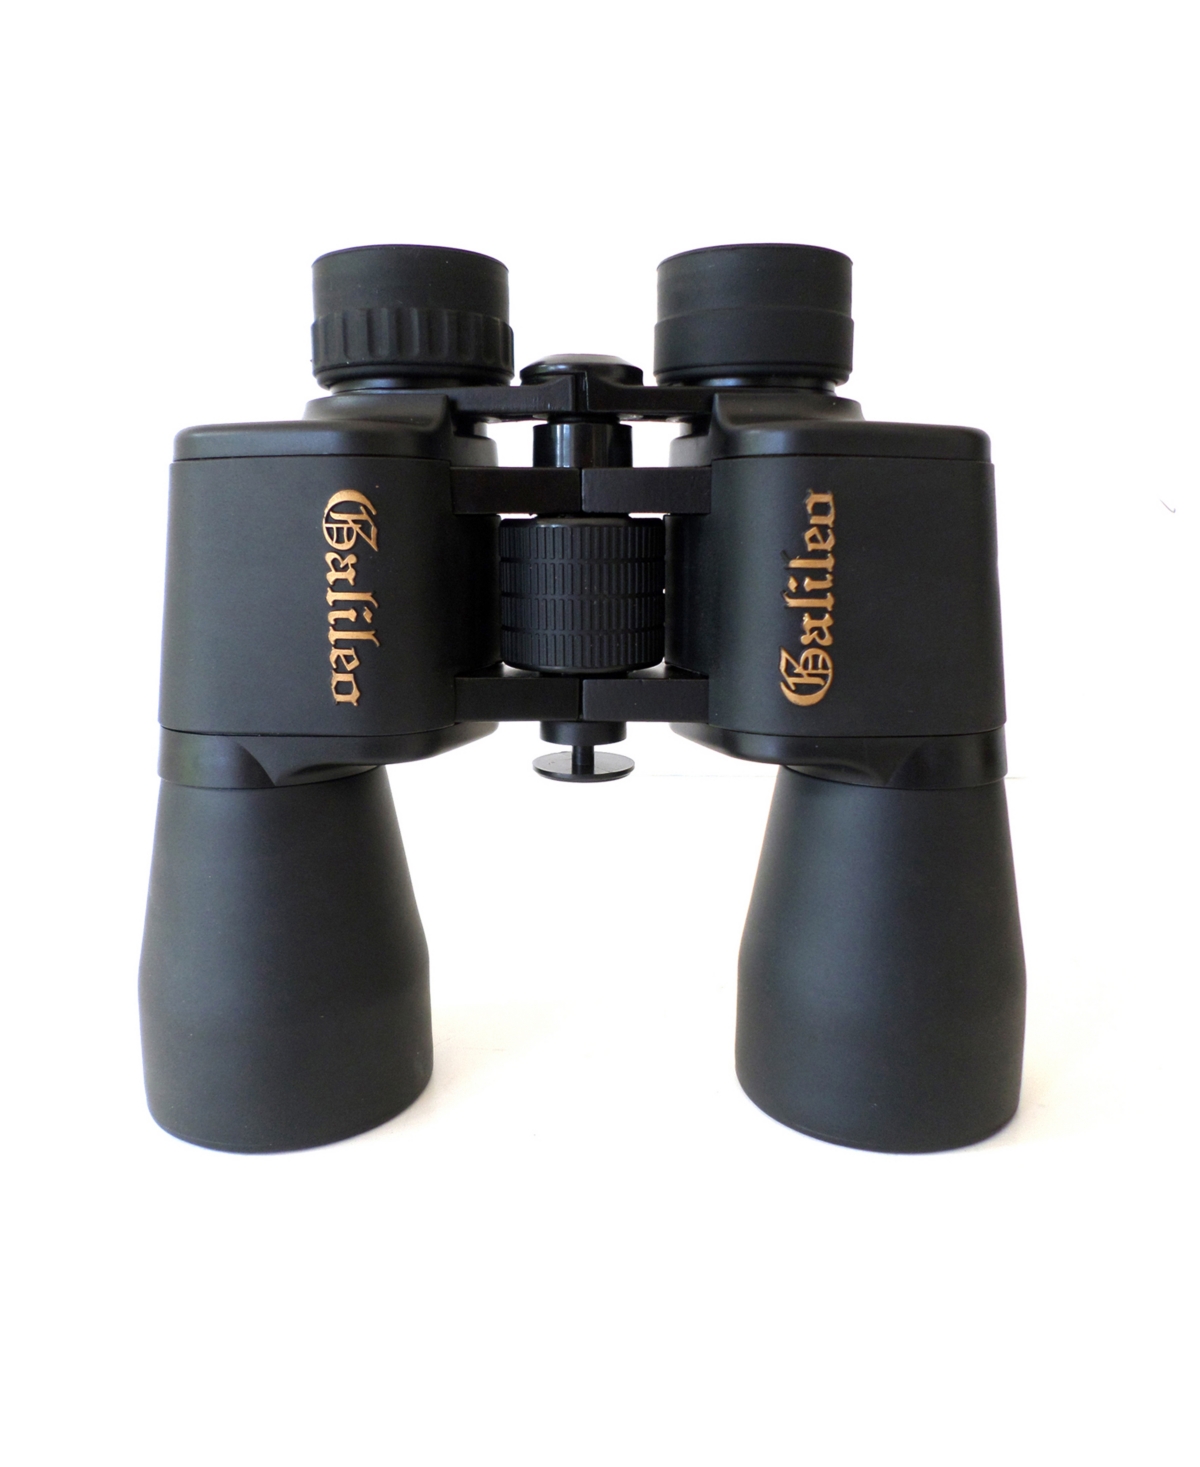 Shop Cosmo Brands Galileo 8 Power Wide Angle Binocular With 40 Mm Lenses, Case And Shoulder Strap In Very Black